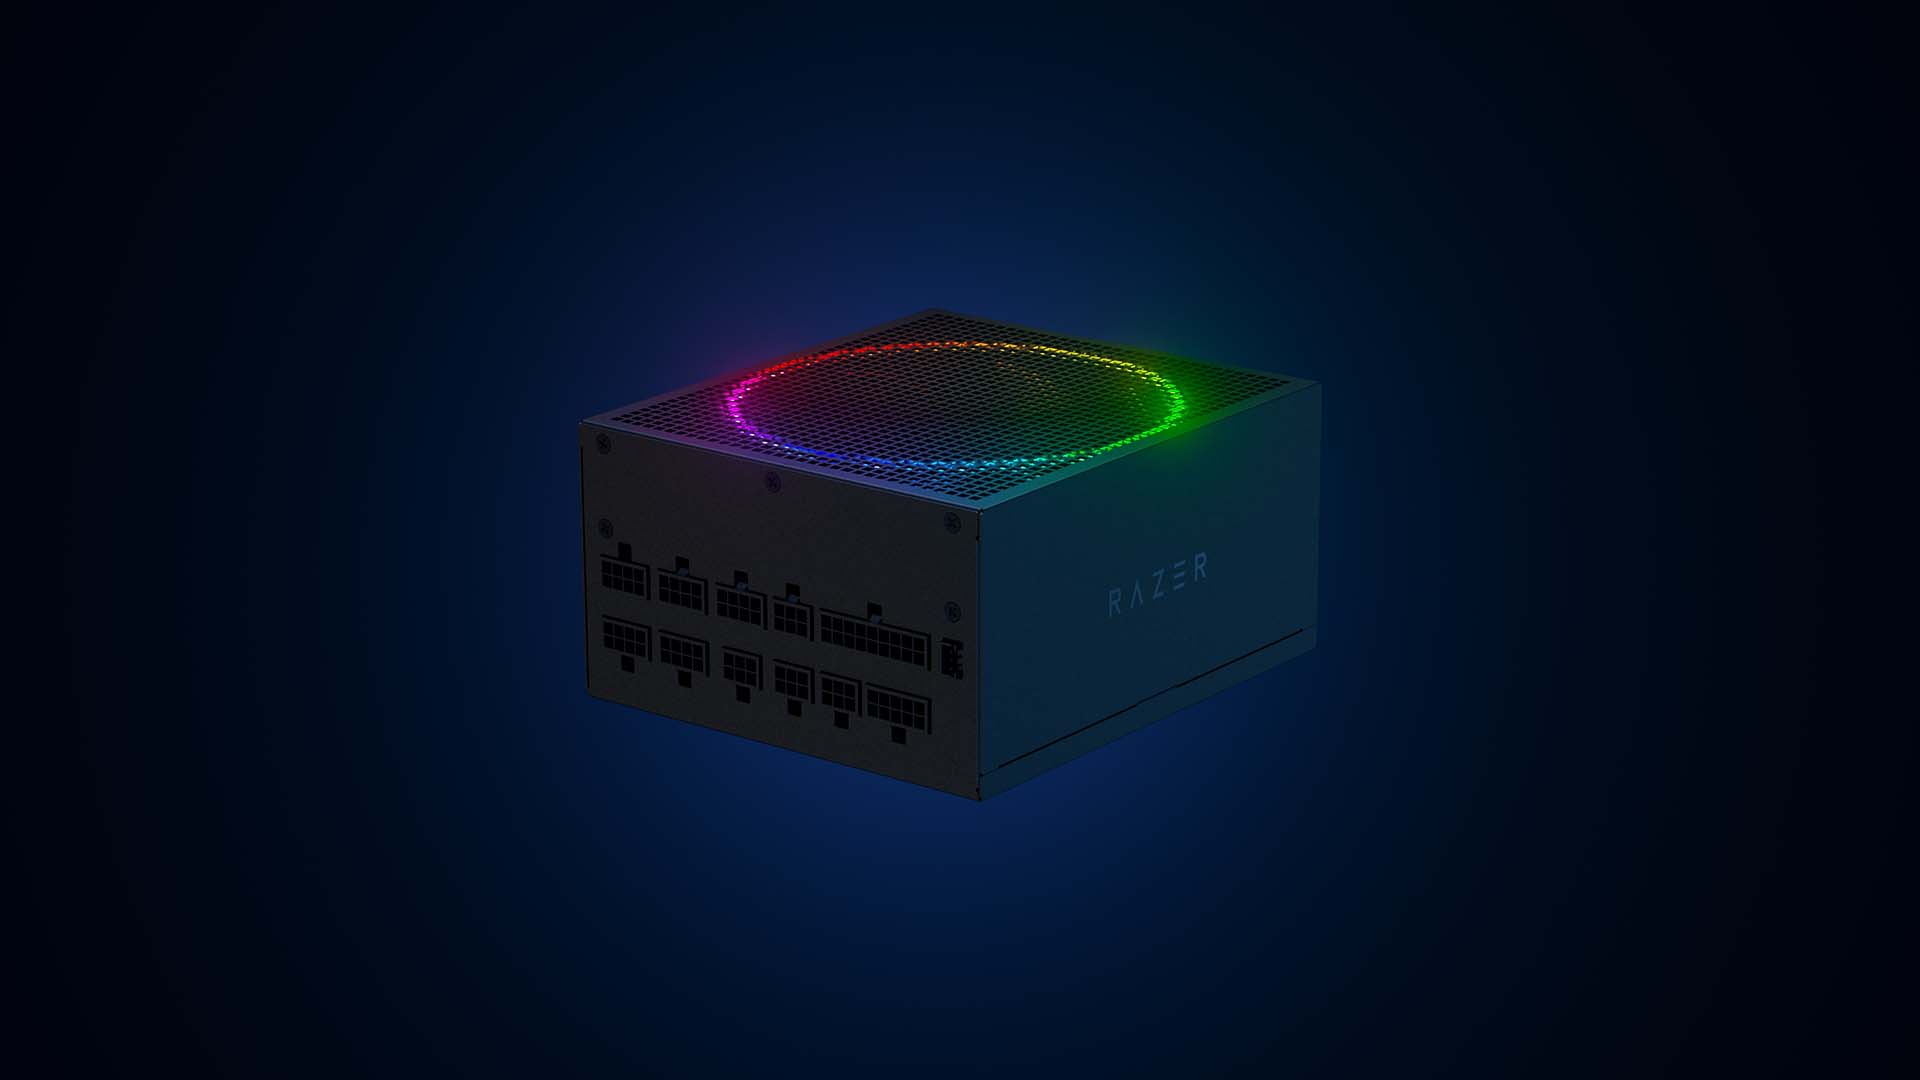 Razer's new PSU with RGB enabled outside of a case